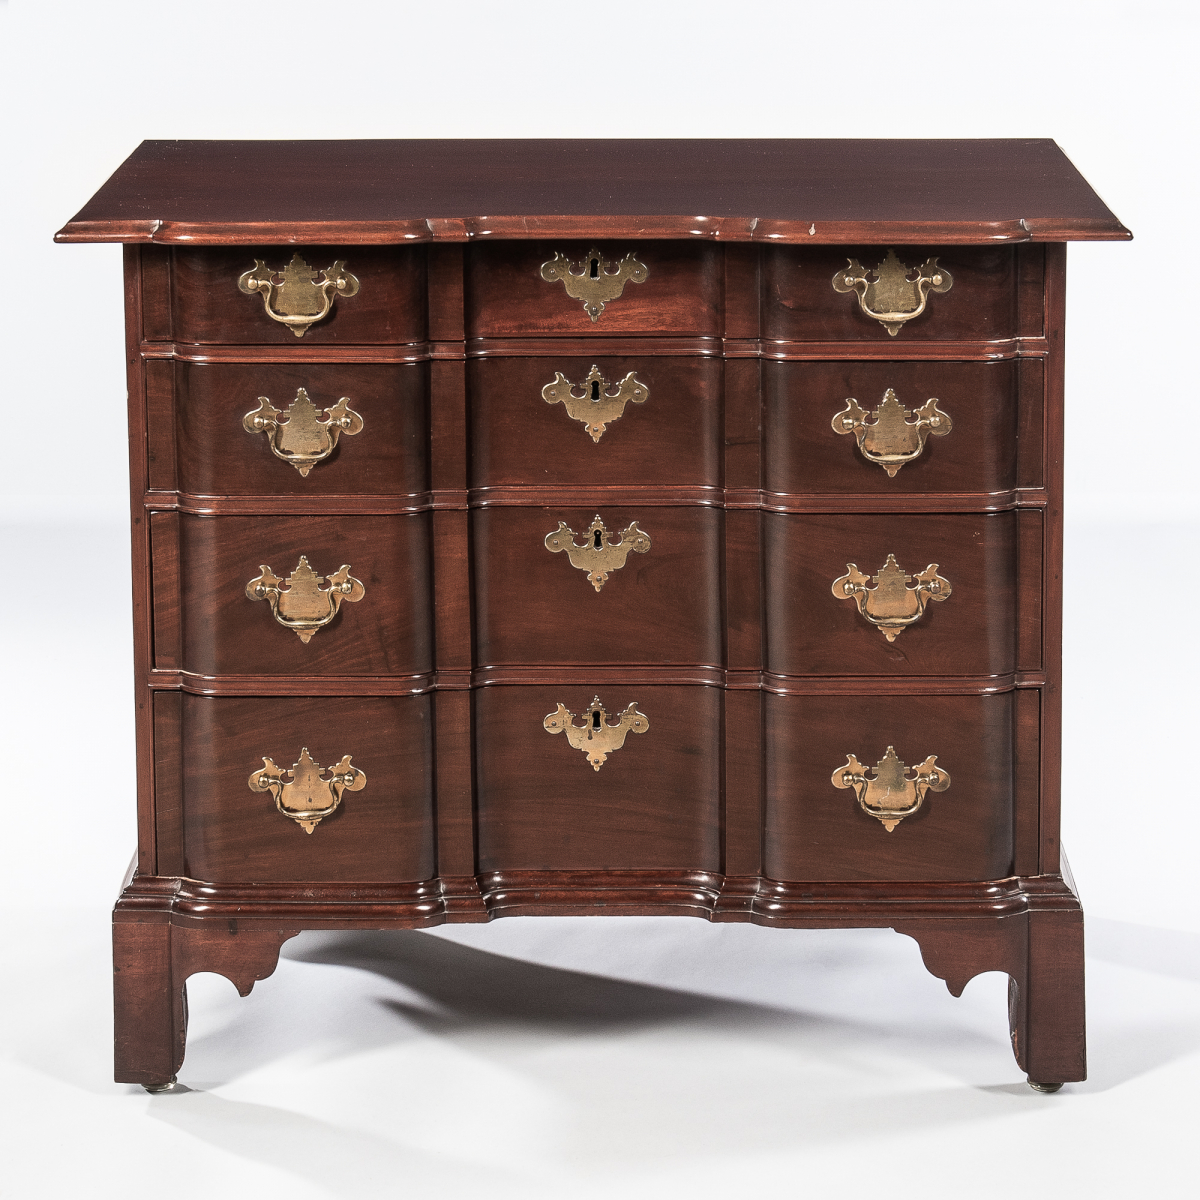 Chippendale Carved Mahogany Block-front Chest of Drawers, Massachusetts, c. 1760-80